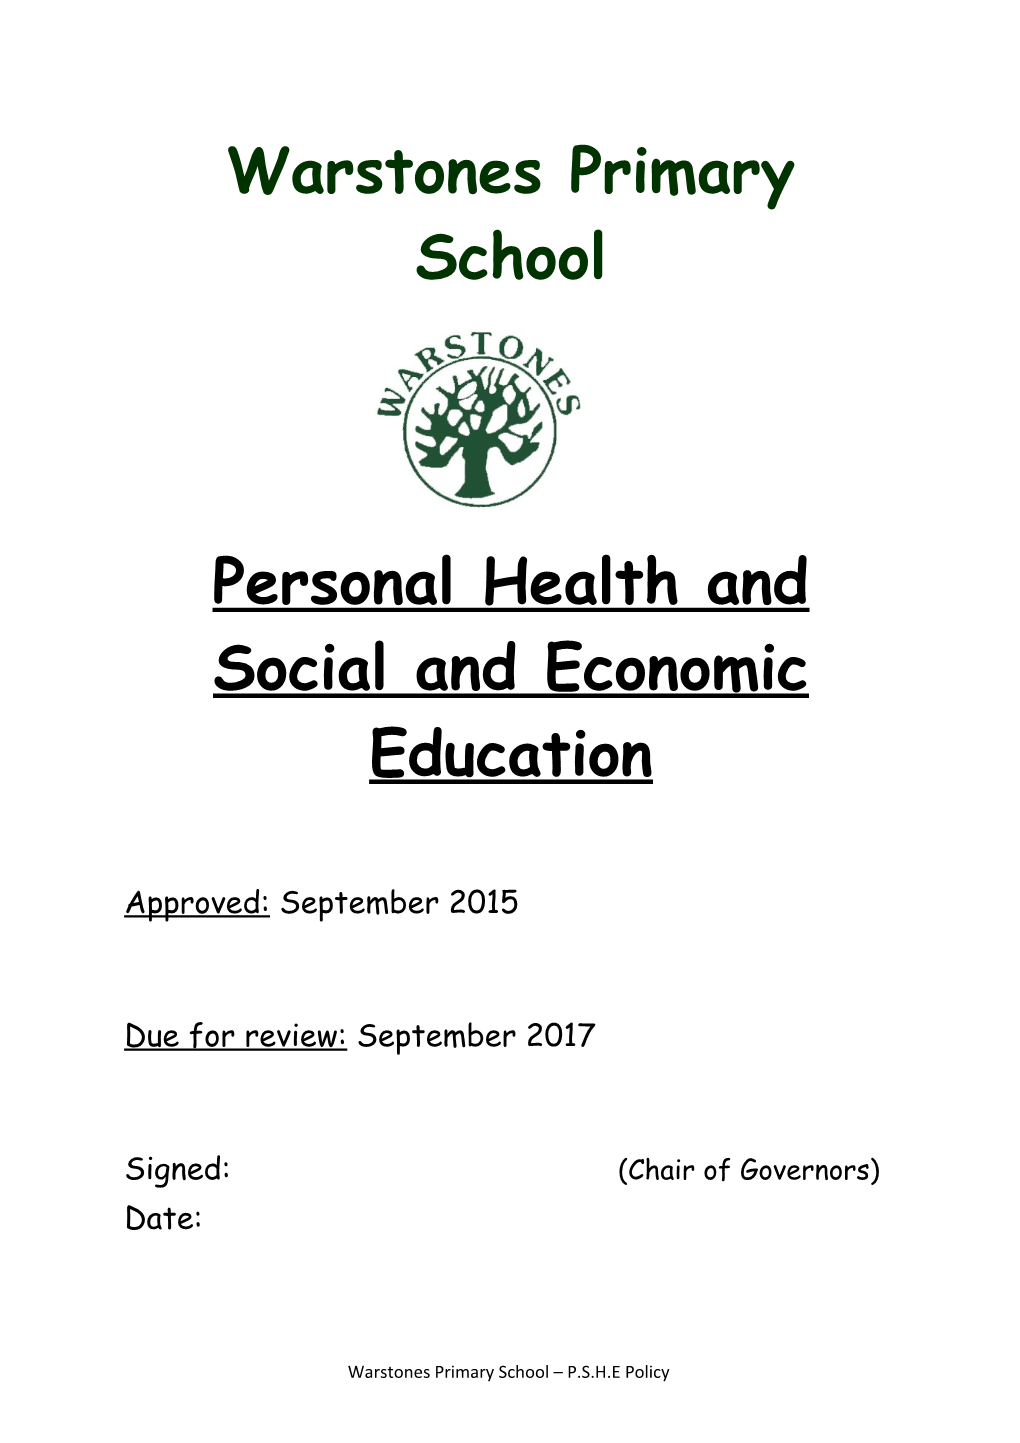 Personal Health and Social and Economic Education